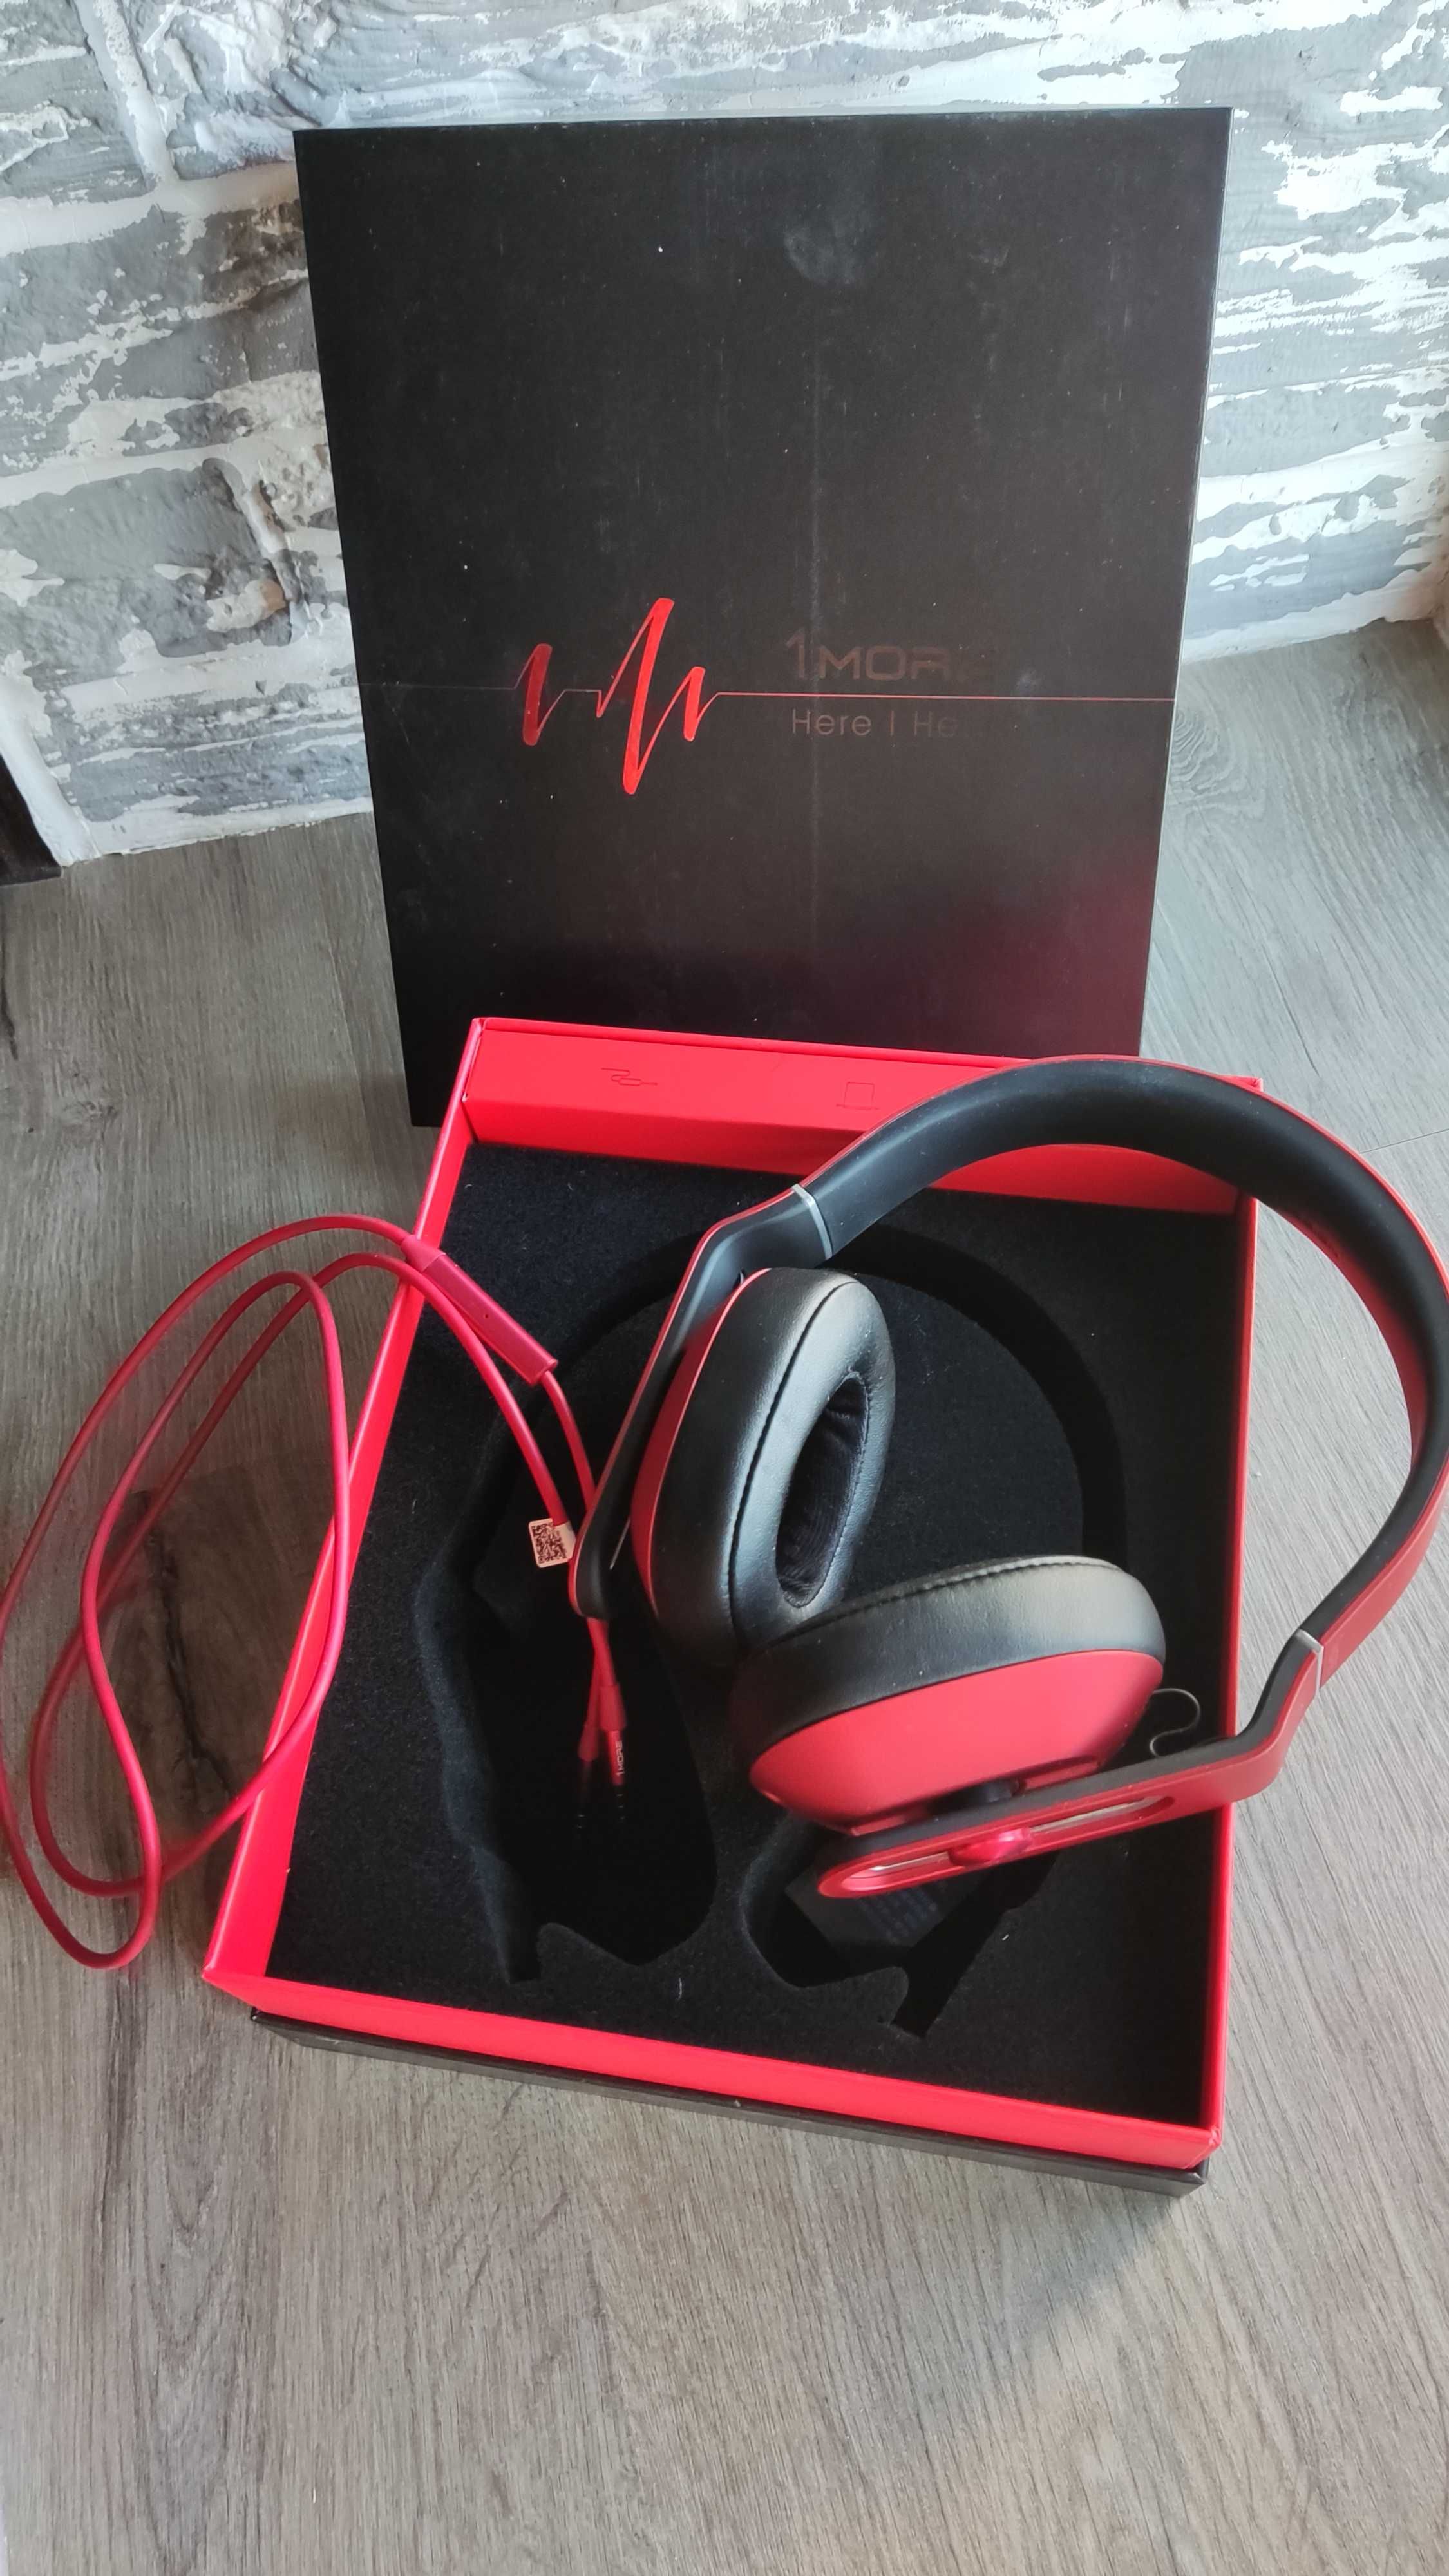 1MORE Over-Ear (MK801) Red